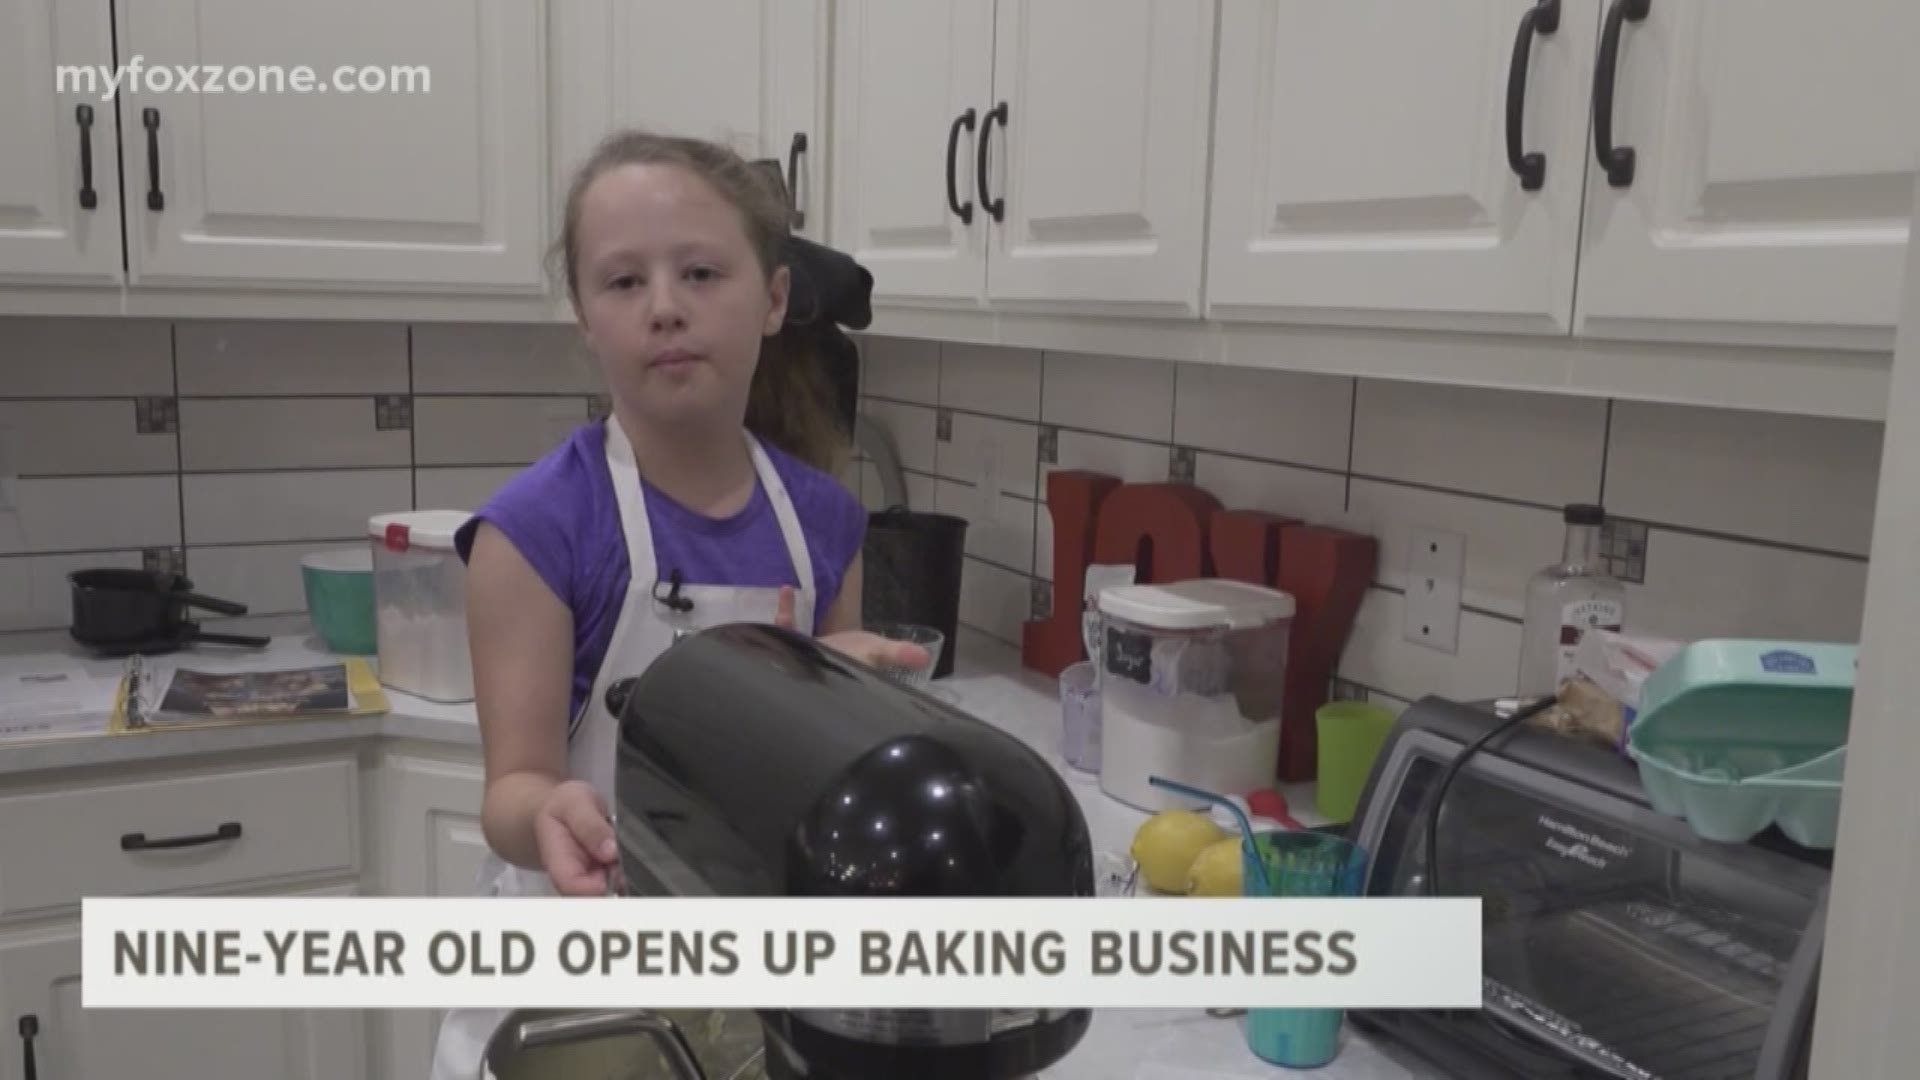 She's not even old enough to open a bank account. But Ella Elkins, 9, has found a sweet way to make a little dough.